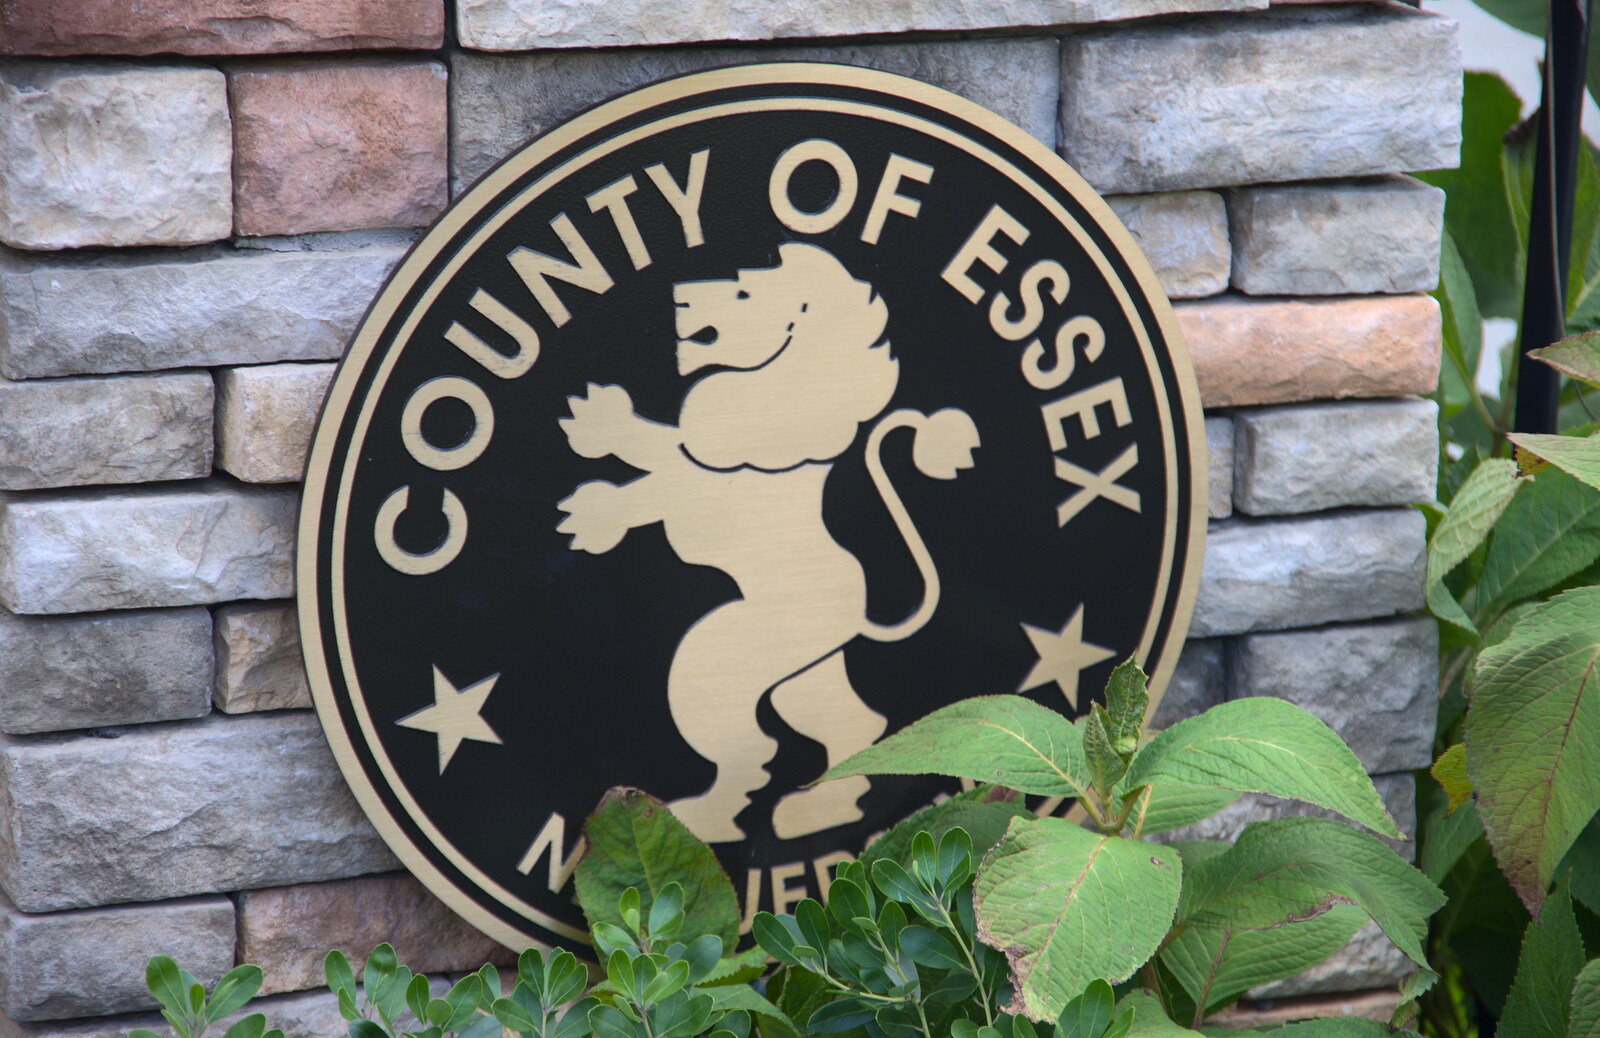 A County of Essex sign from Pumpkin Picking at Alstede Farm, Chester, Morris County, New Jersey - 24th October 2018